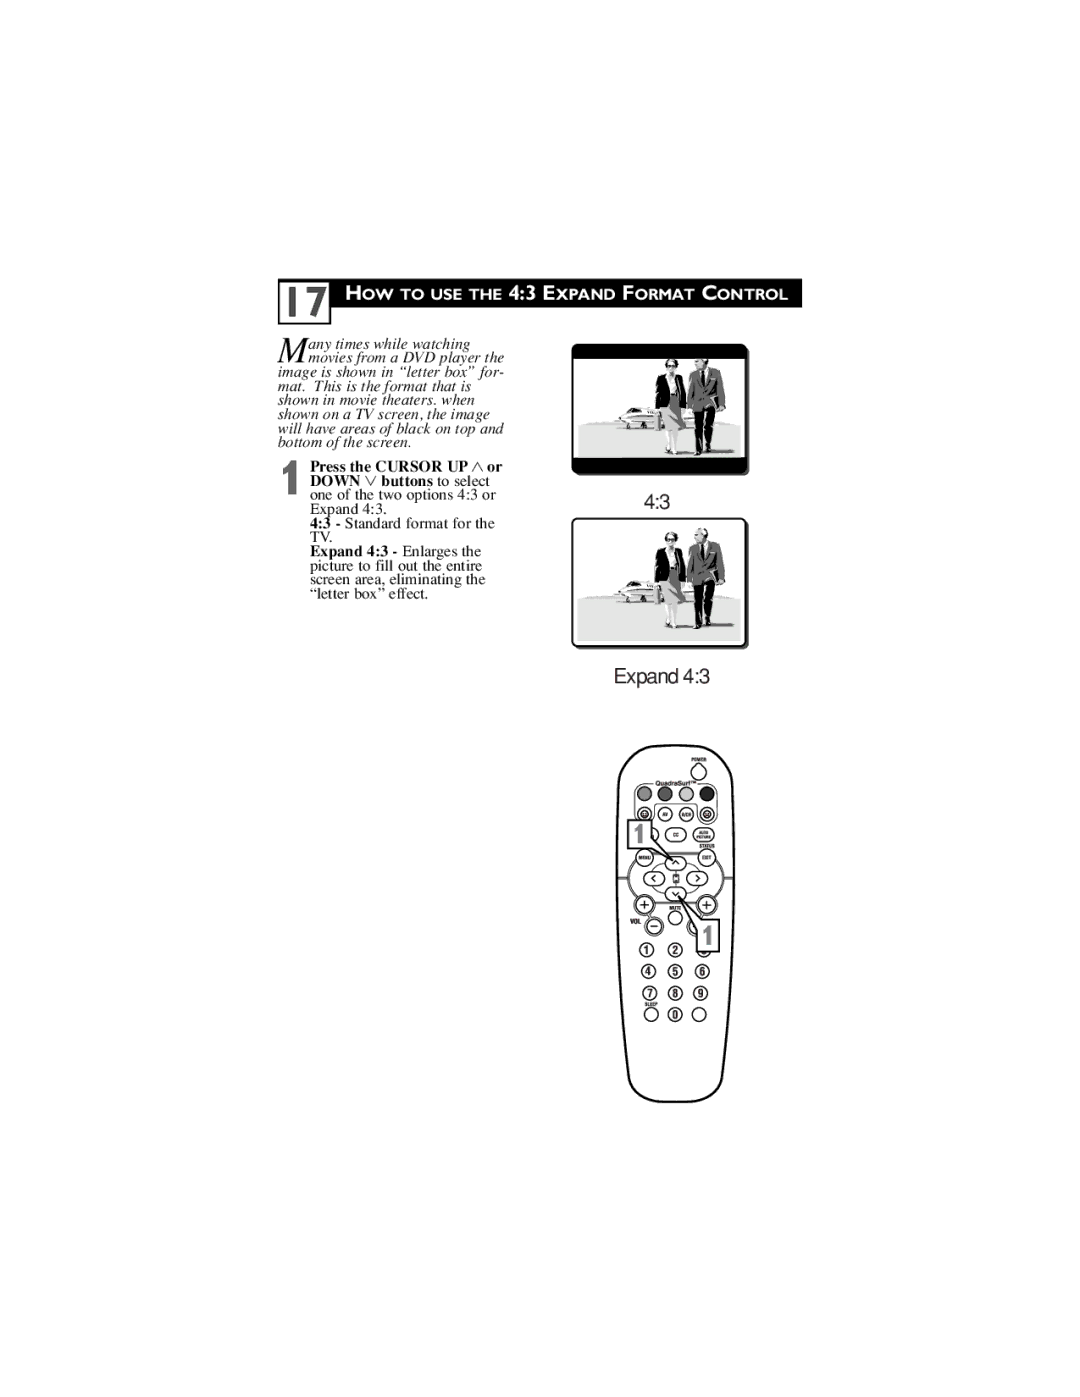 Philips 32PT5441/37 user manual HOW to USE the 43 Expand Format Control, Press the Cursor UP 3 or Down 4 buttons to select 